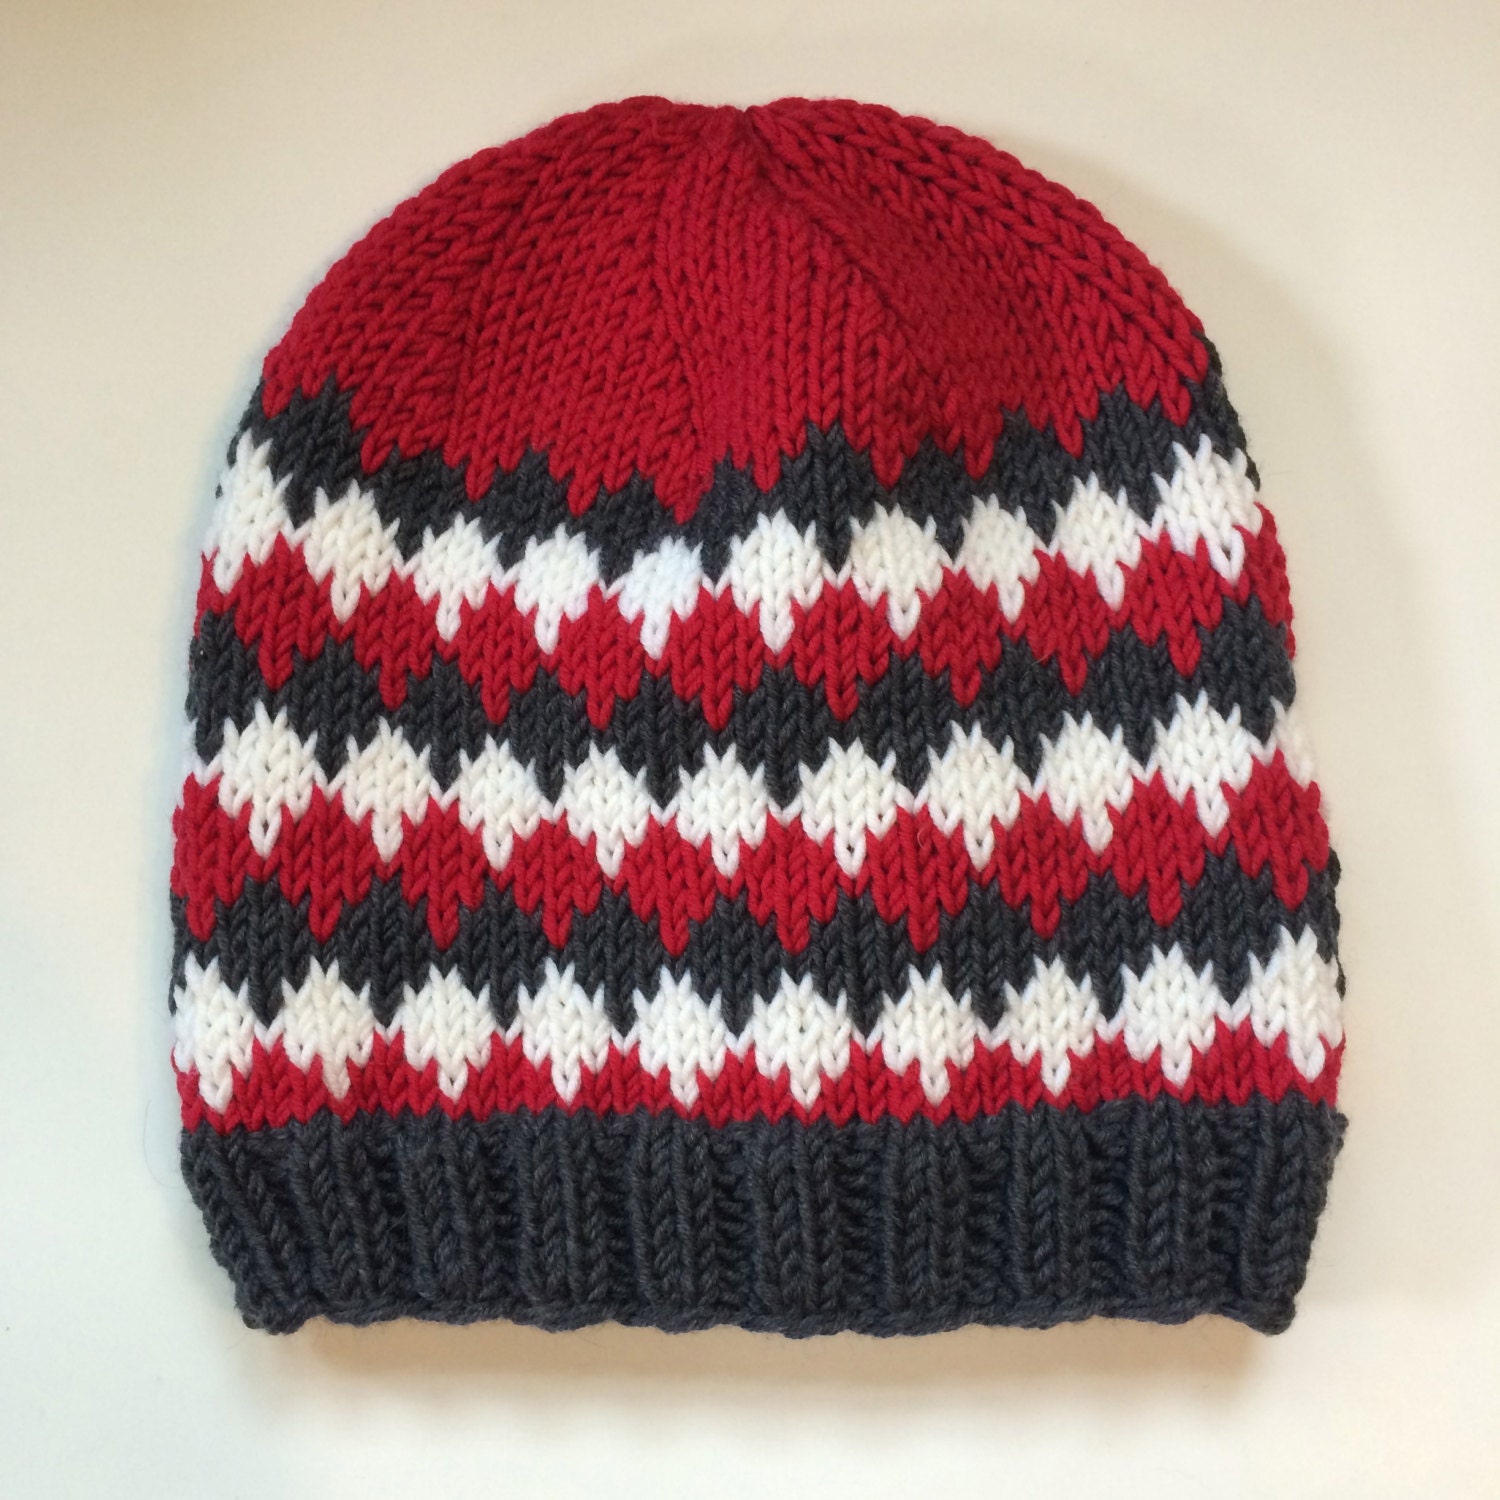 Hand-Knitted Hat by KnitsByDay on Etsy